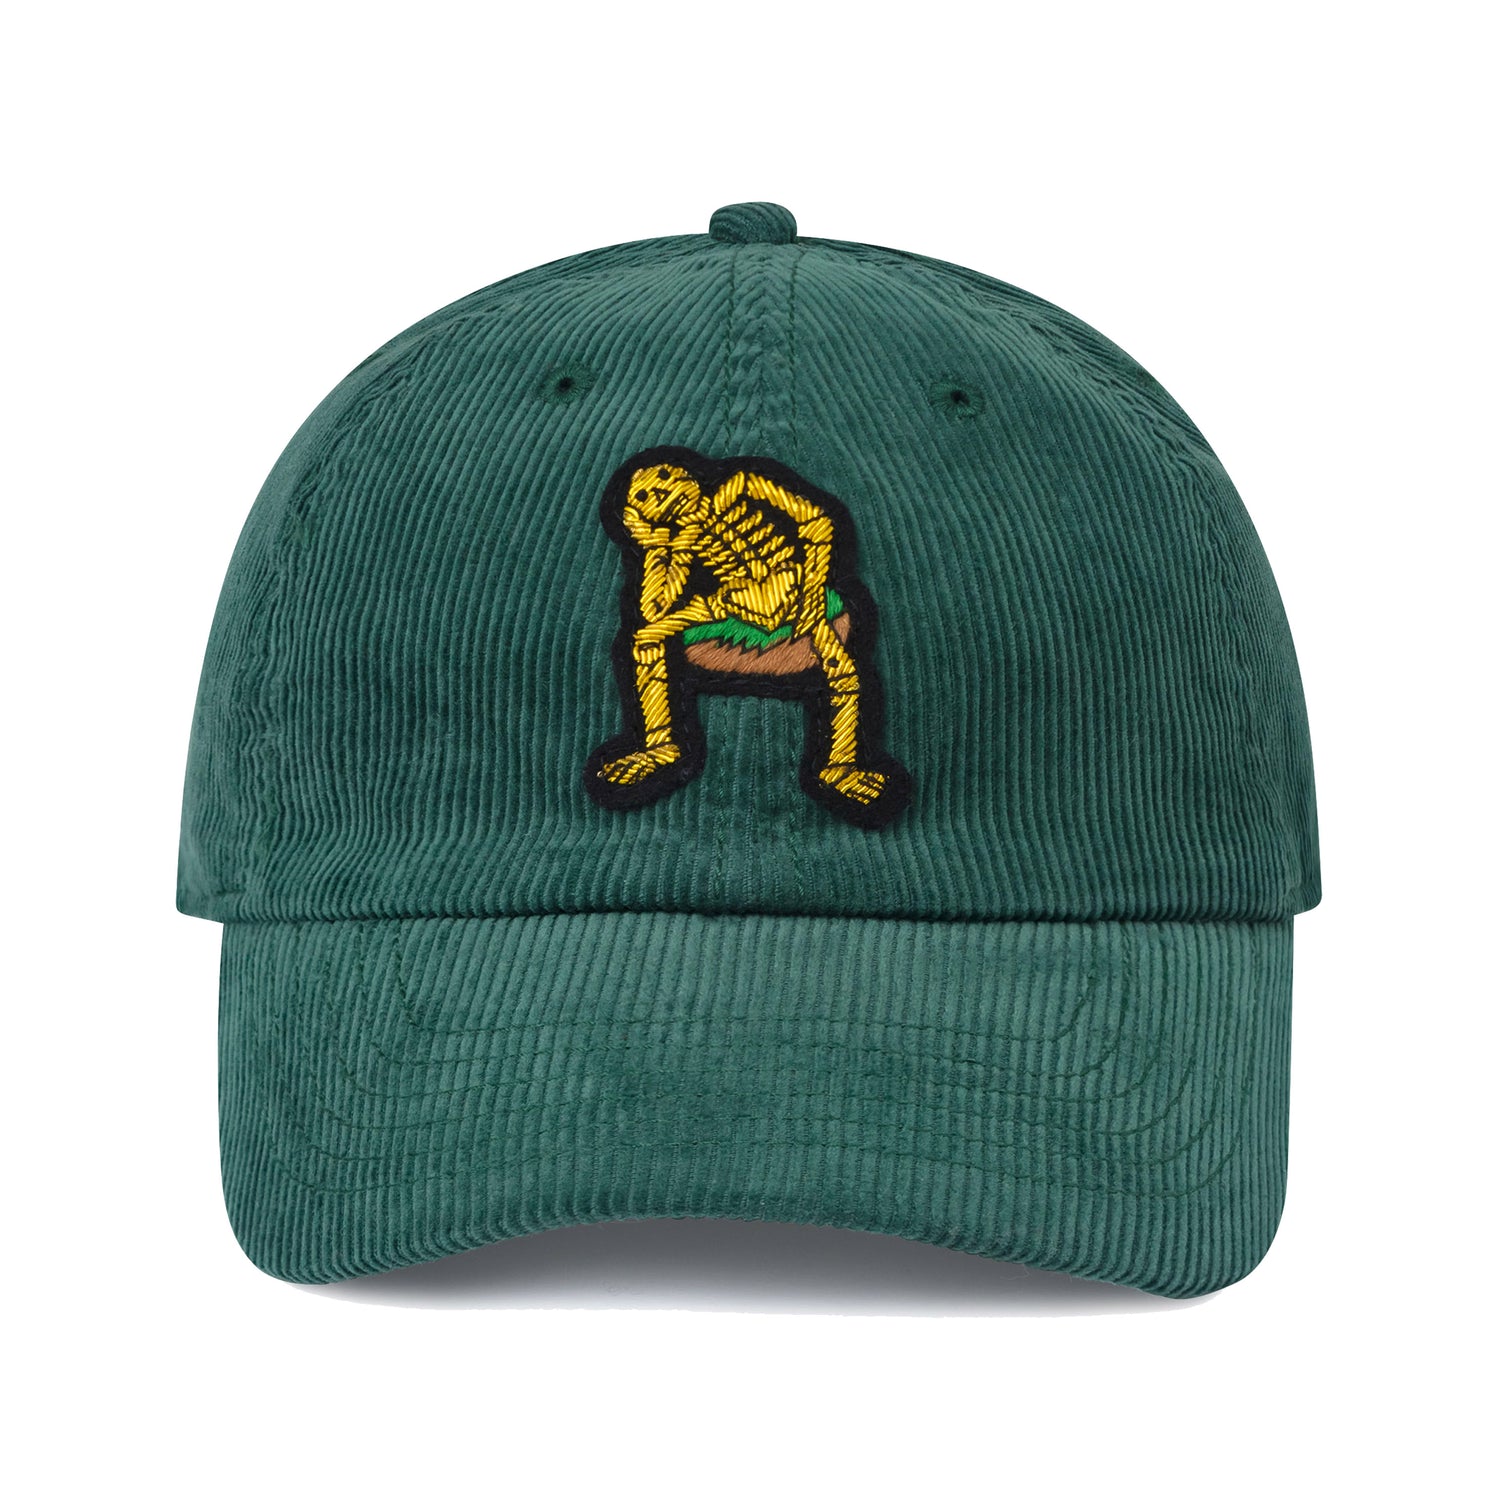 Green corduroy hat with hand-embroidered wire bullion Derry Bones badge.